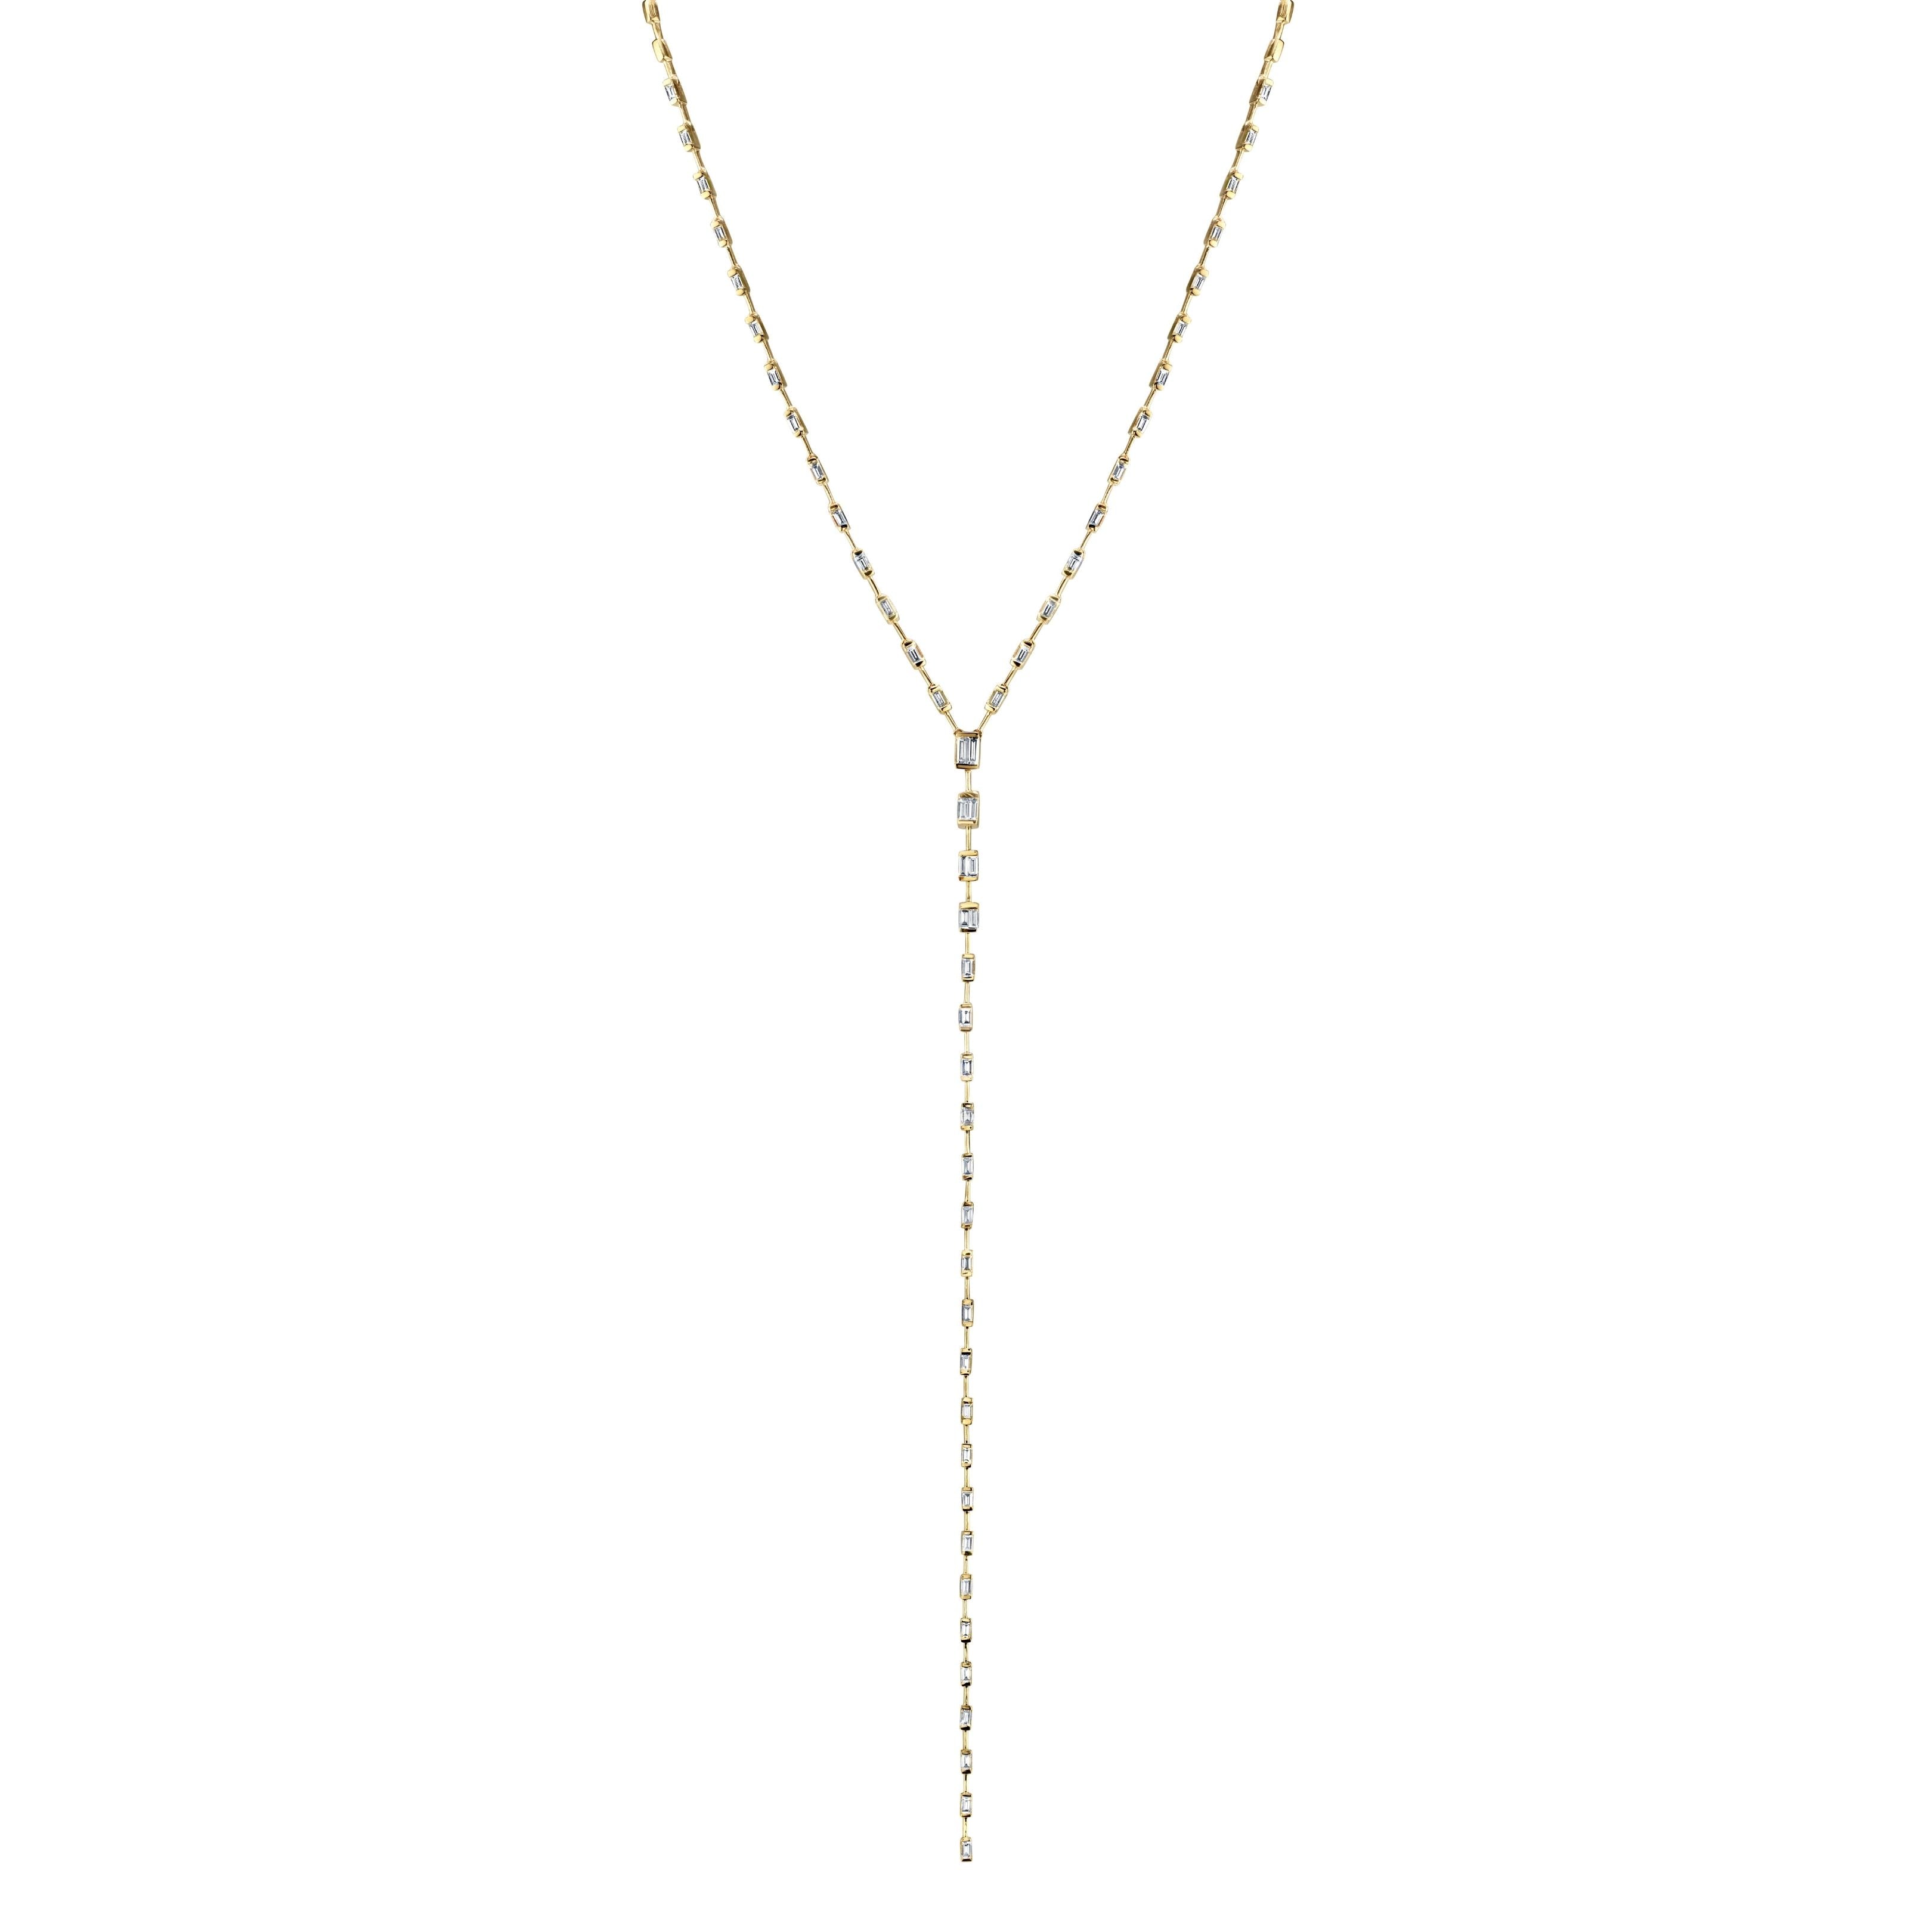 Buy CARATGLITZ Designer Gold and Diamond Afsa Lariat Necklace for Women and  Girls(27MS7NE10216) at Amazon.in